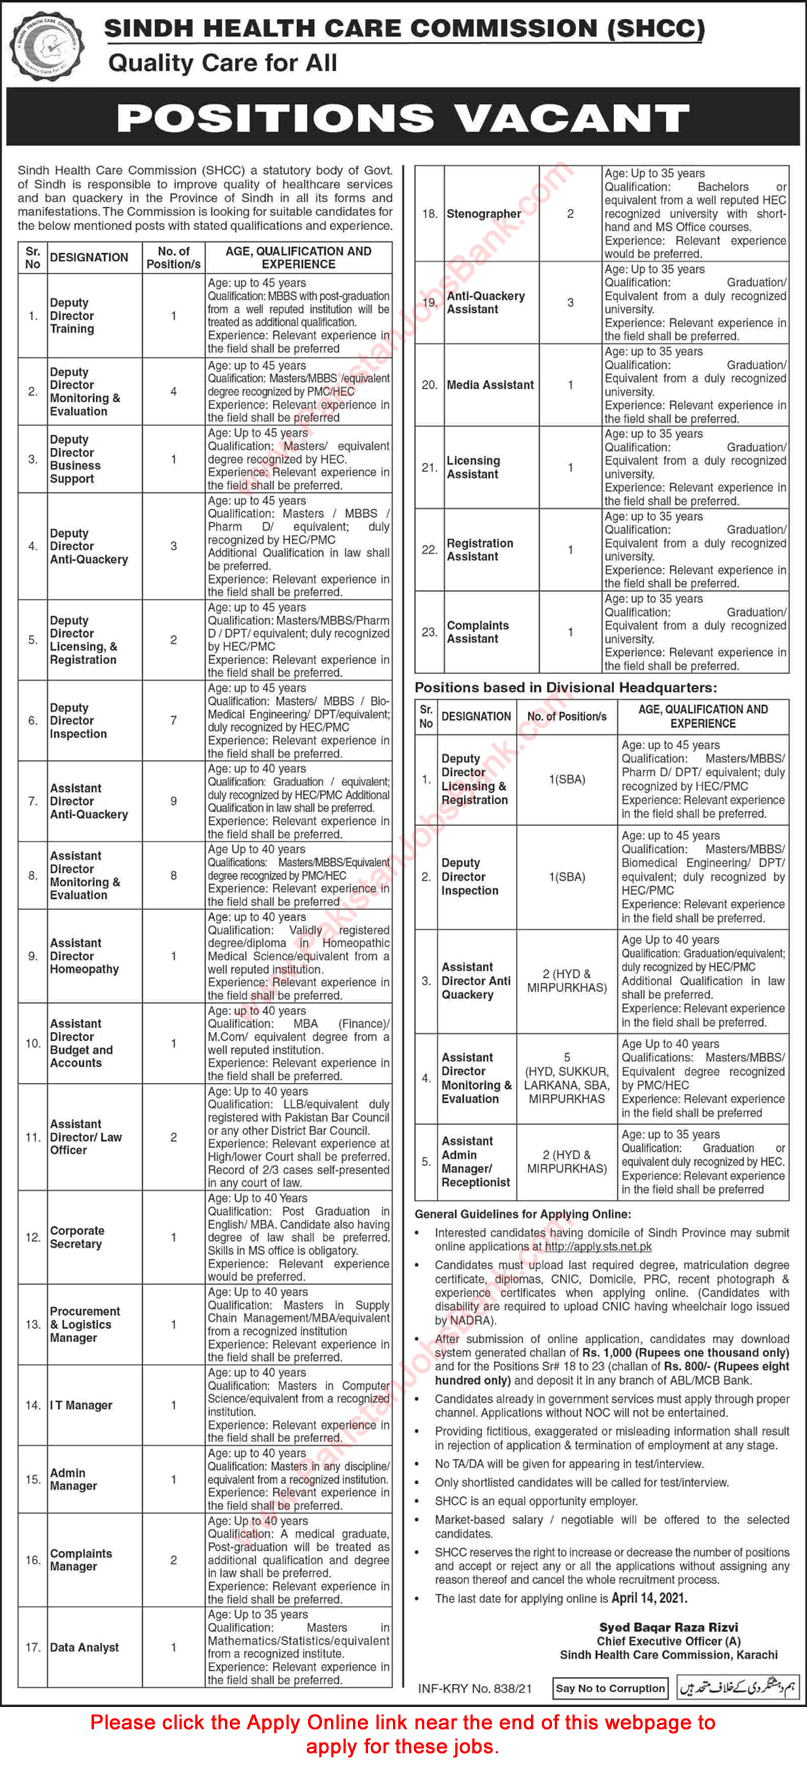 Sindh Health Care Commission Jobs 2021 March STS Apply Online Assistant Directors & Others Latest